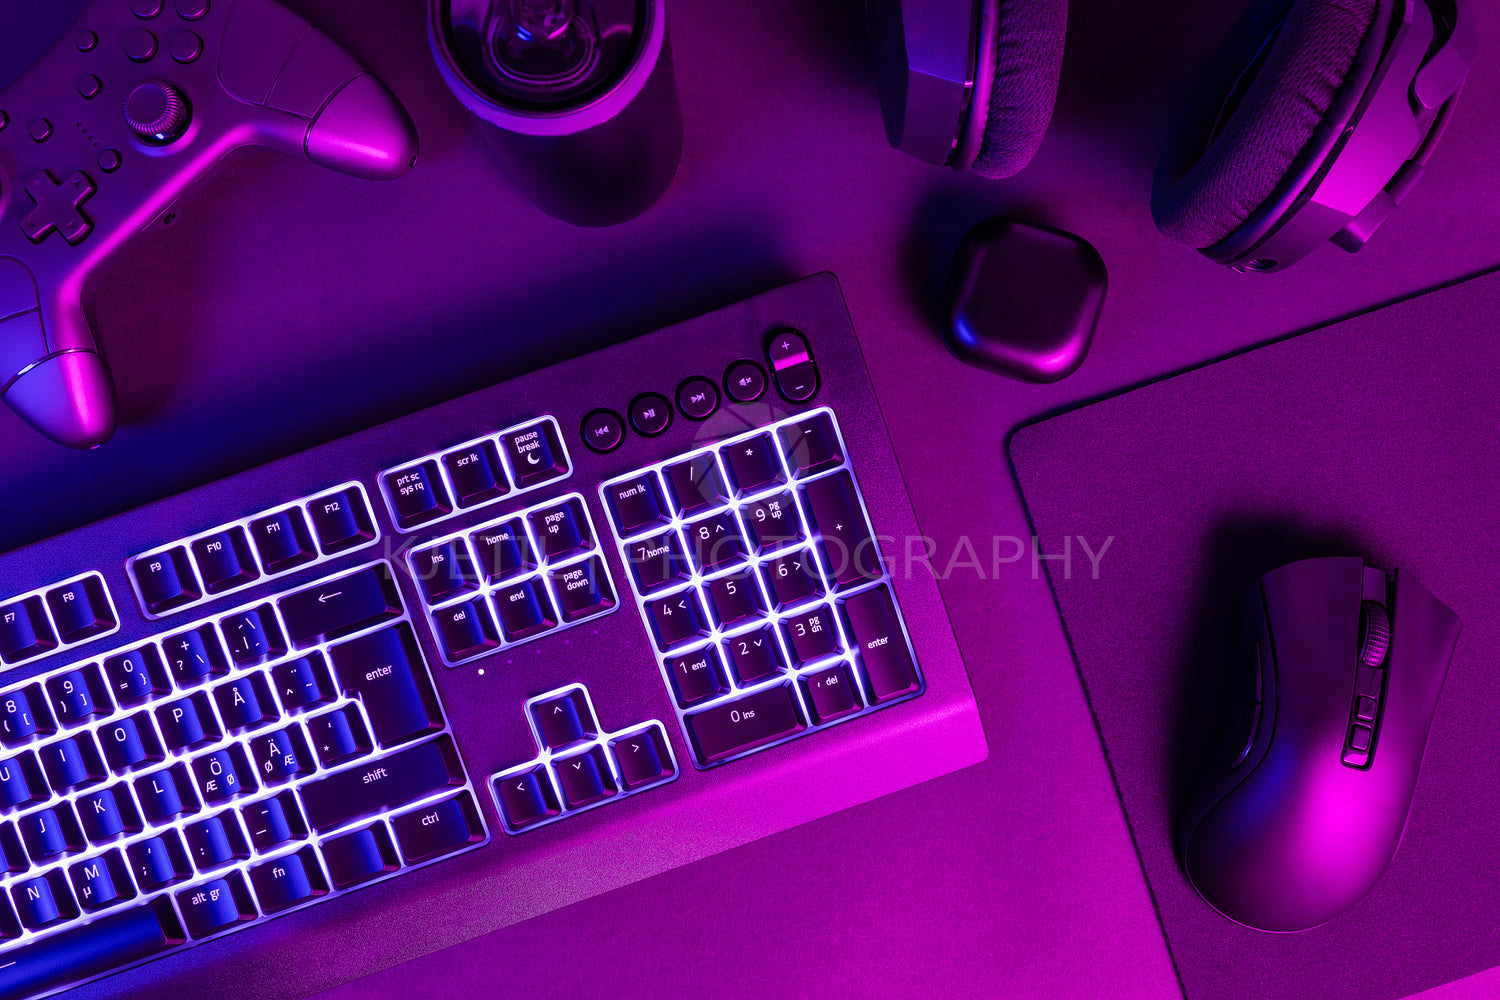 White lit keyboard surrounded by various modern wireless gadgets